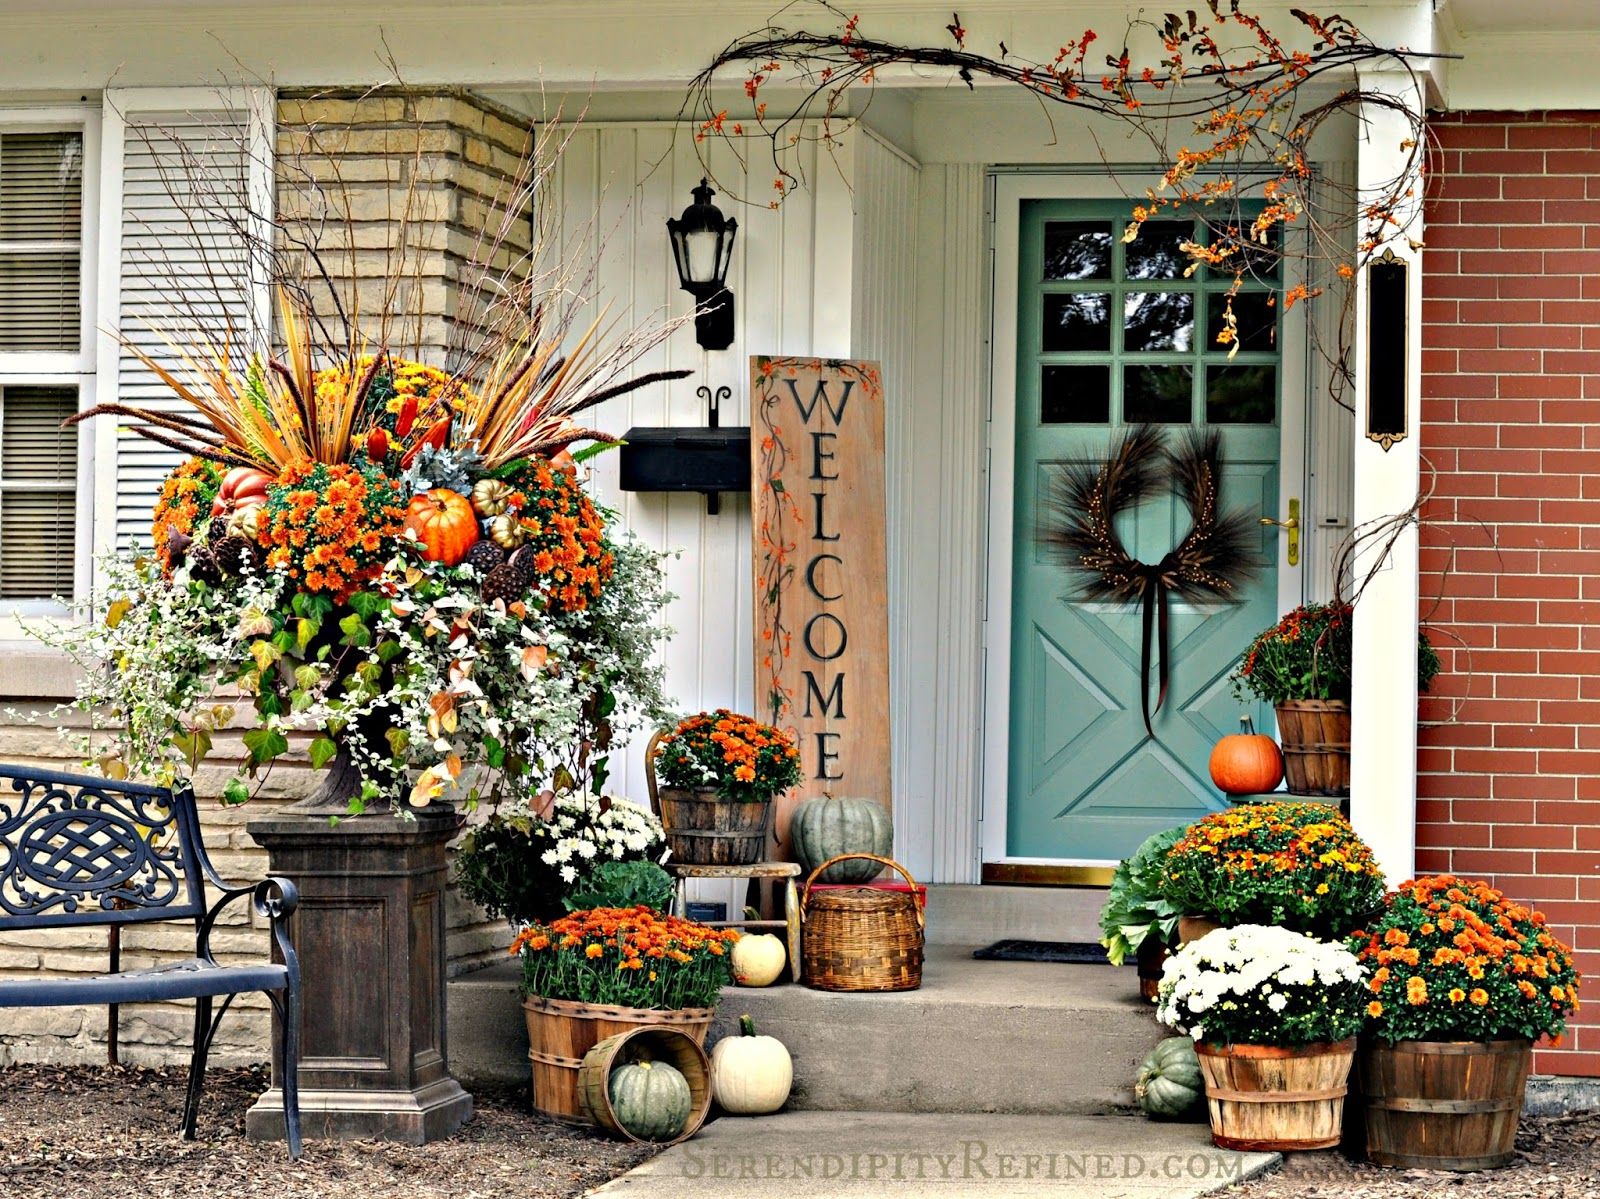 Outdoor Fall Decorating Ideas Front Porch -   DIY Fall Front Porch Decorating Ideas